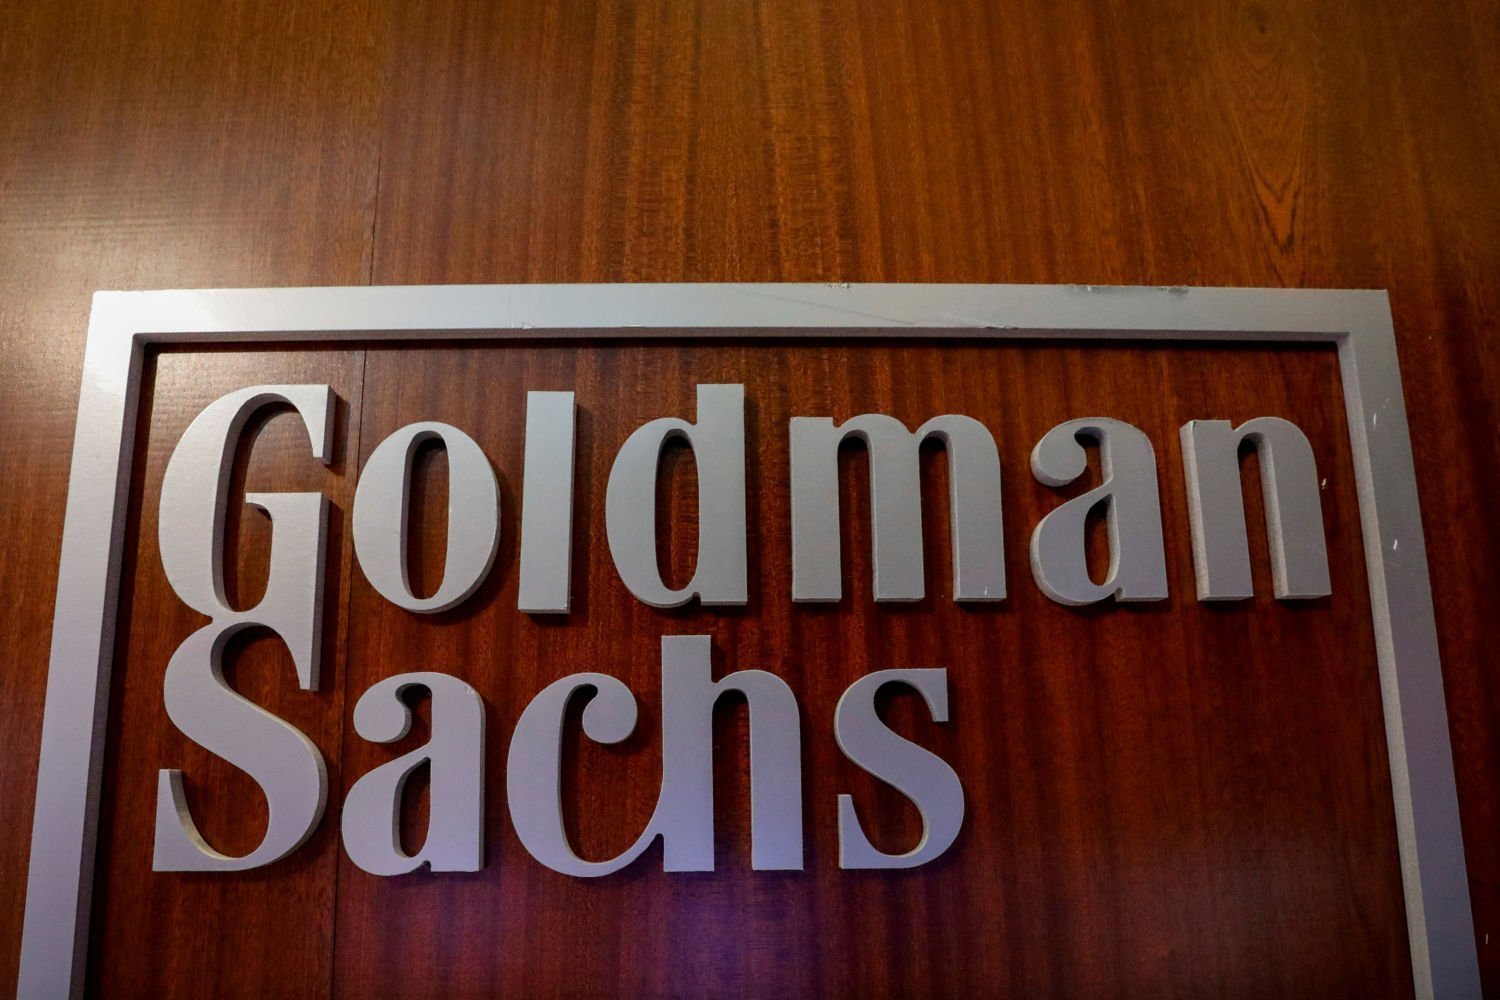 goldman sachs sterling company brexit likely deal says cyprus york goldmans seen floor space